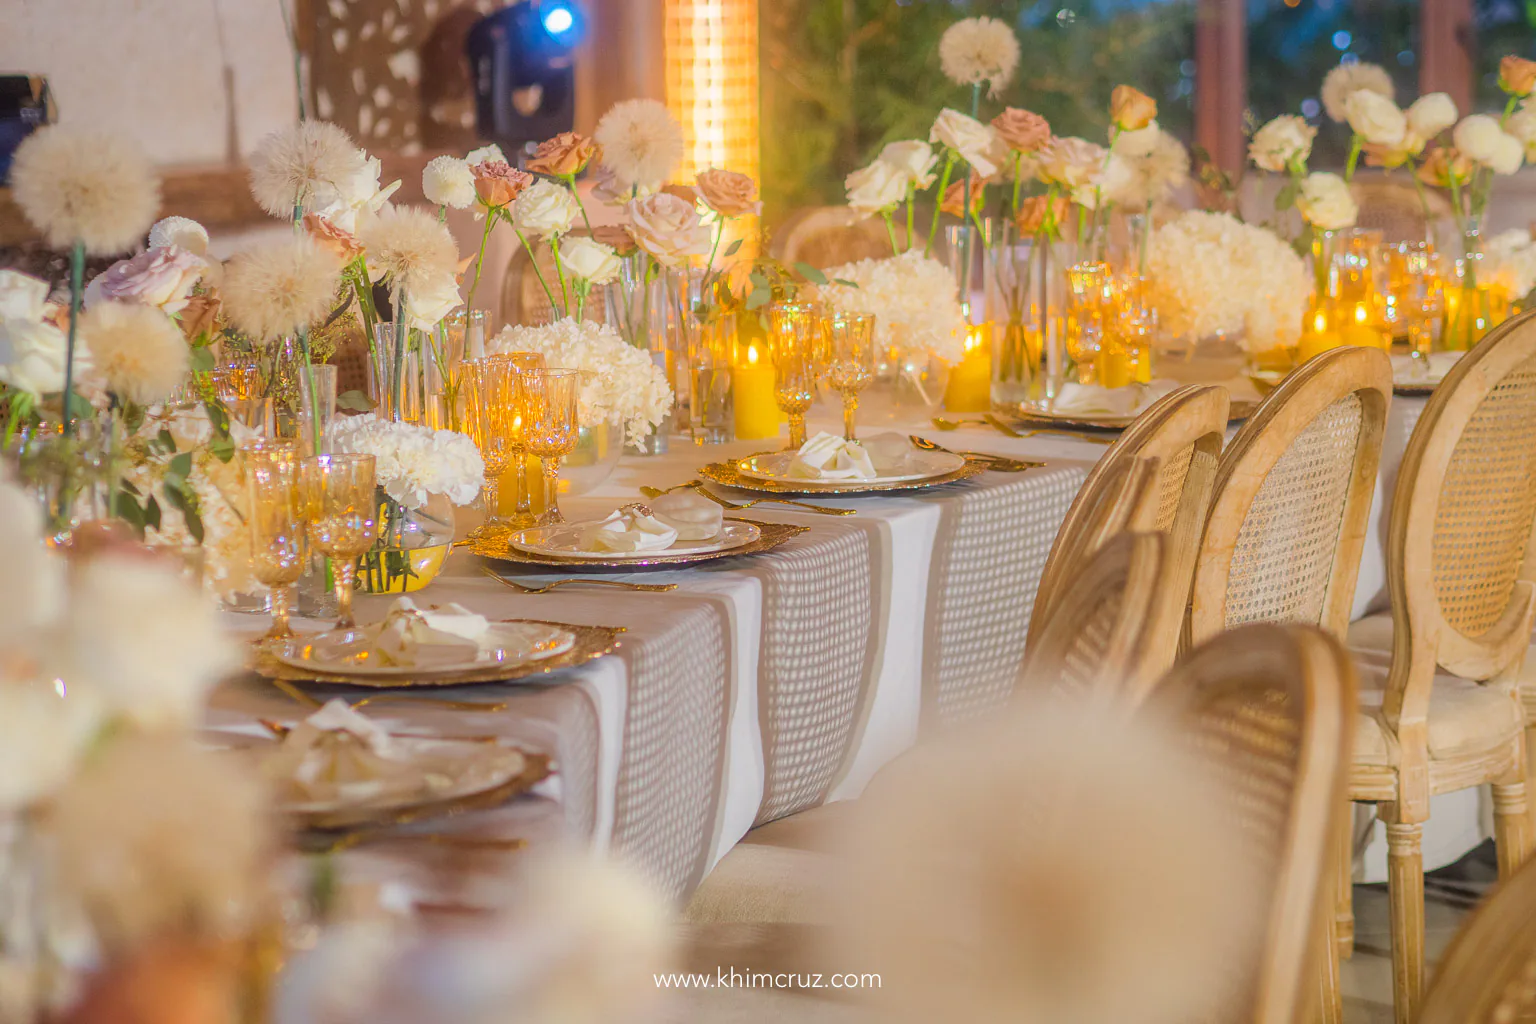 the wedding reception seamlessly shifted into a celebration marked by its simple elegance